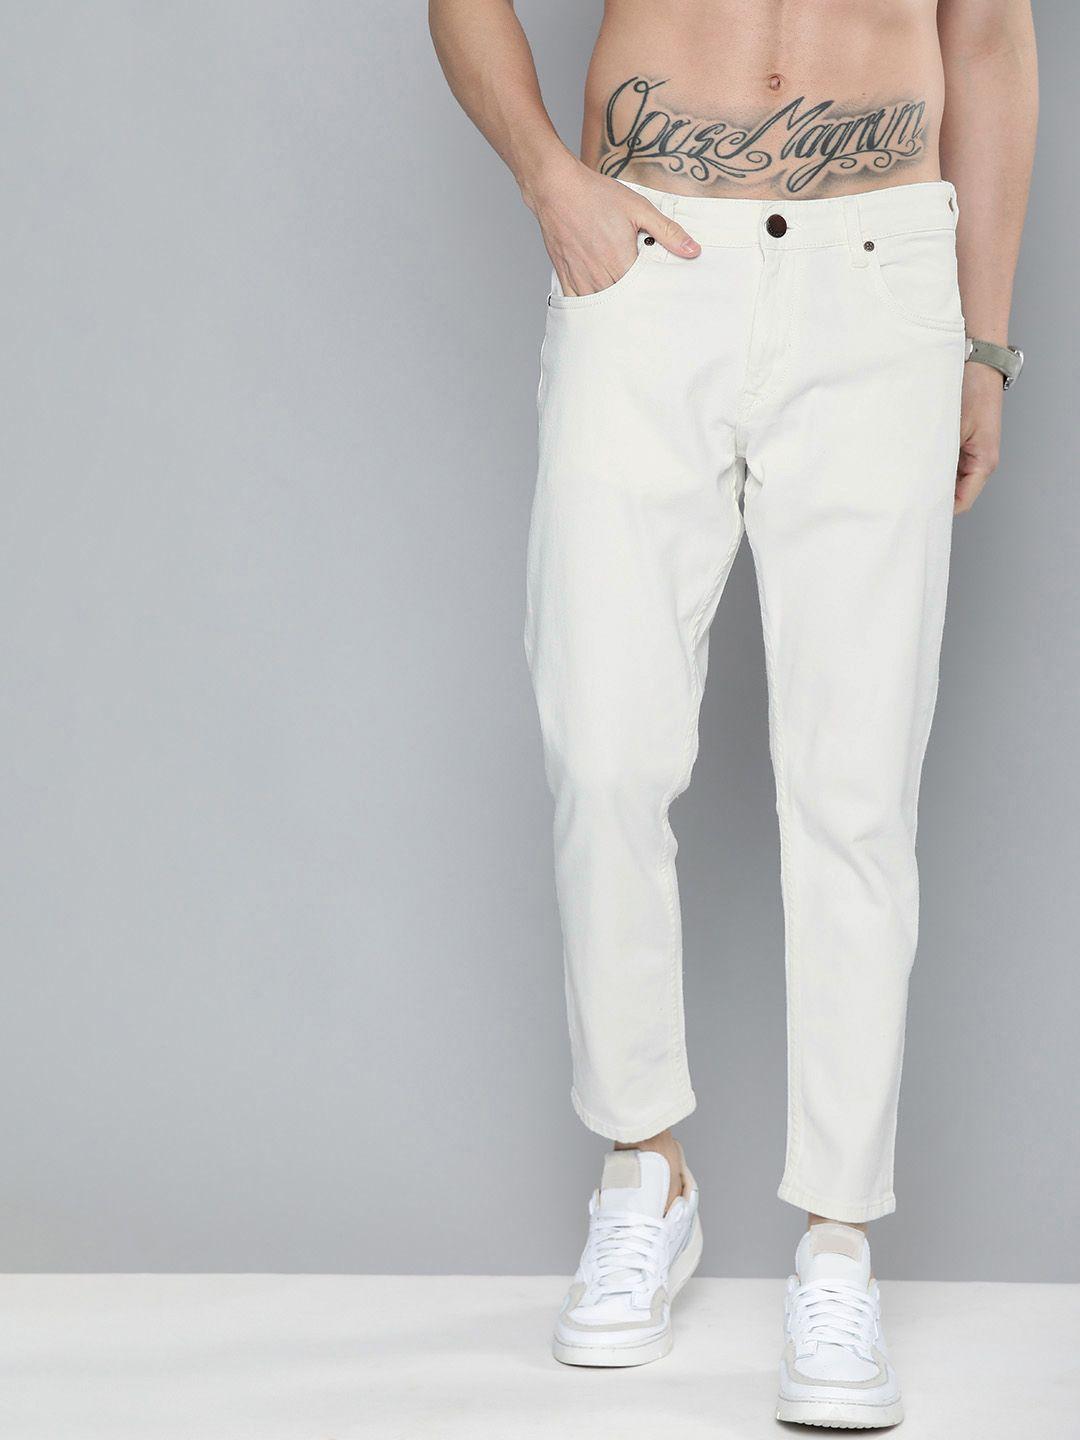 here&now men white slim tapered fit mid-rise clean look stretchable ankle-length jeans